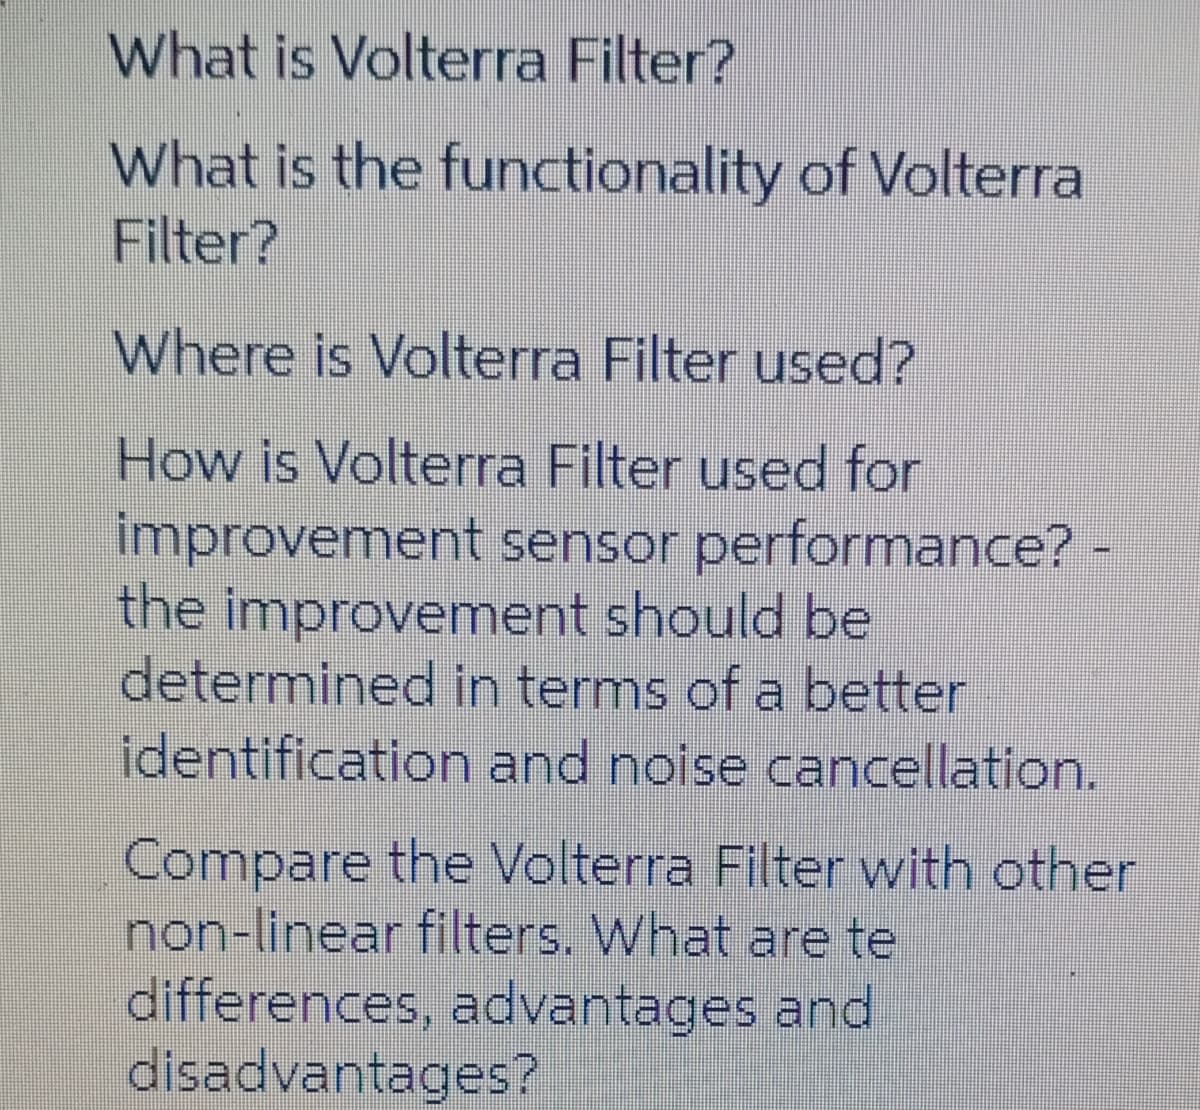 What is Volterra Filter?
What is the functionality of Volterra
Filter?
Where is Volterra Filter used?
How is Volterra Filter used for
improvement sensor performance? -
the improvement should be
determined in terms of a better
identification and noise cancellation.
Compare the Volterra Filter with other
non-linear filters. What are te
differences, advantages and
disadvantages?
